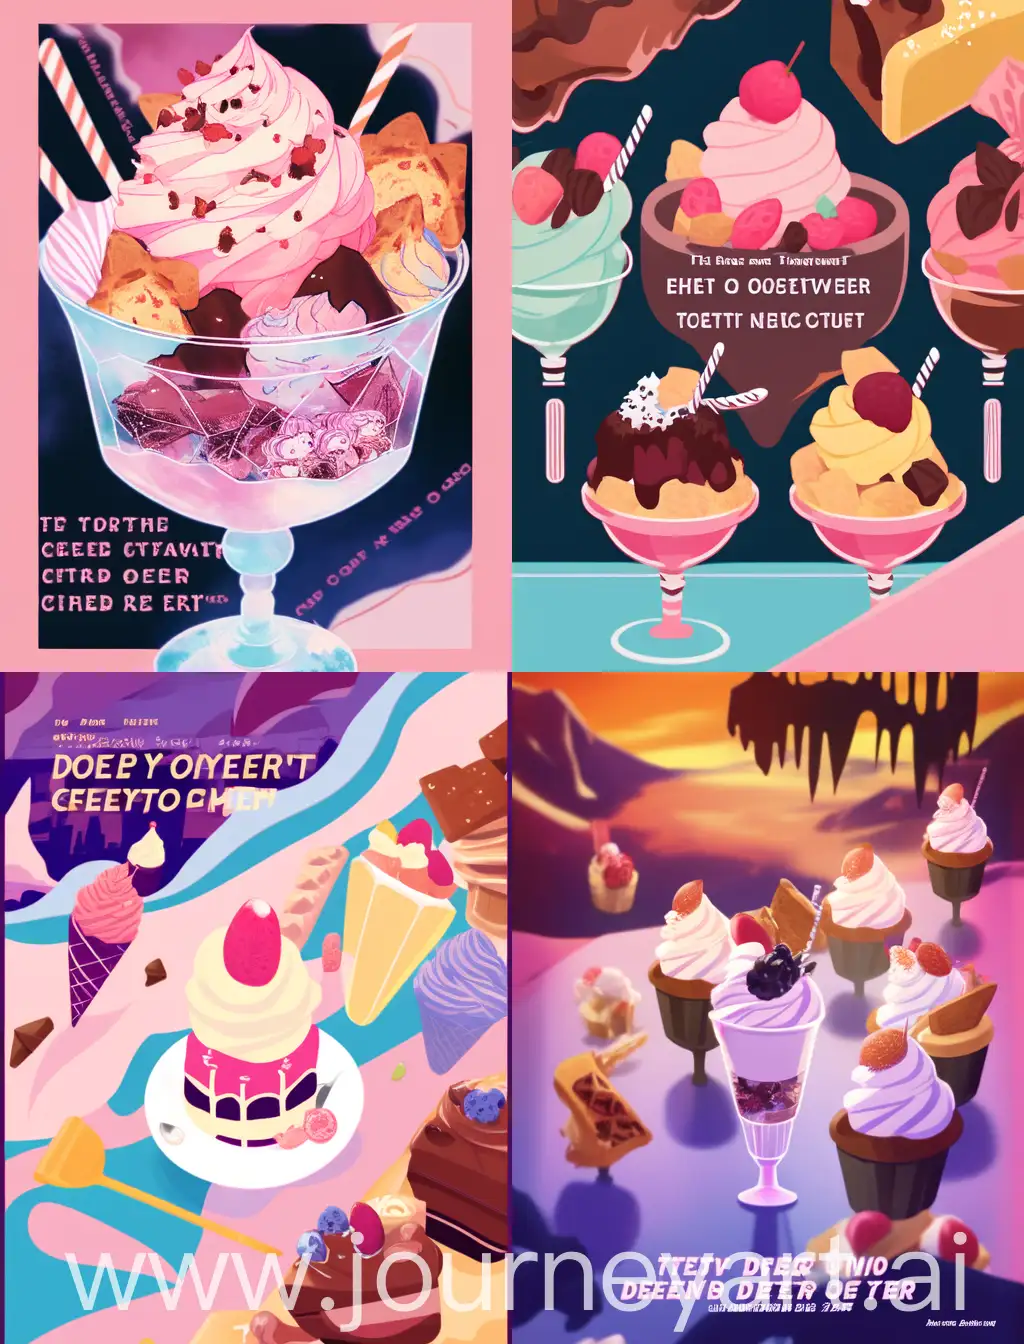 Bringing-People-Together-with-Desserts-Aesthetic-Poster-Featuring-Sweet-Delights-and-Inspirational-Quote